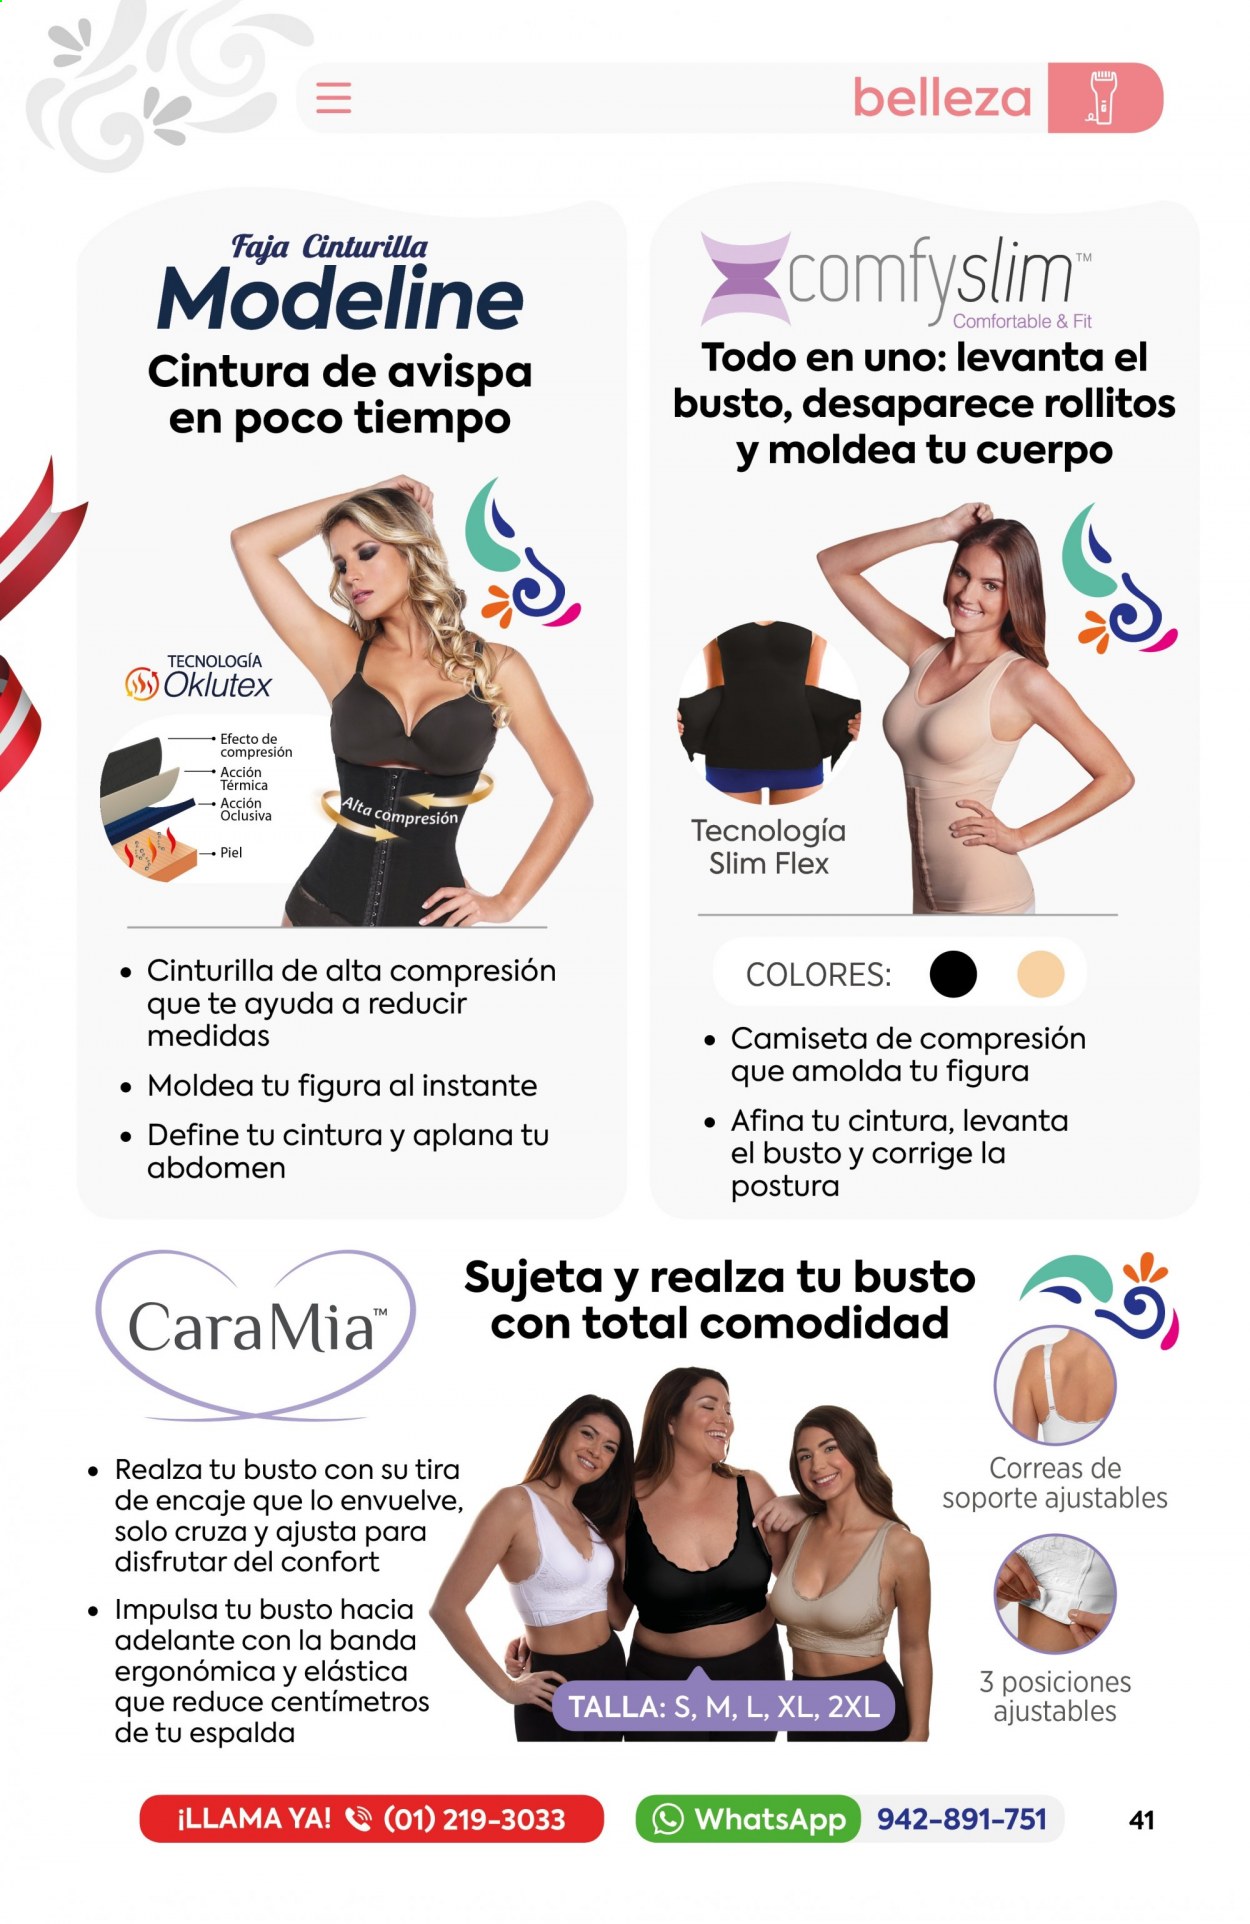 Catálogo Quality Products. 